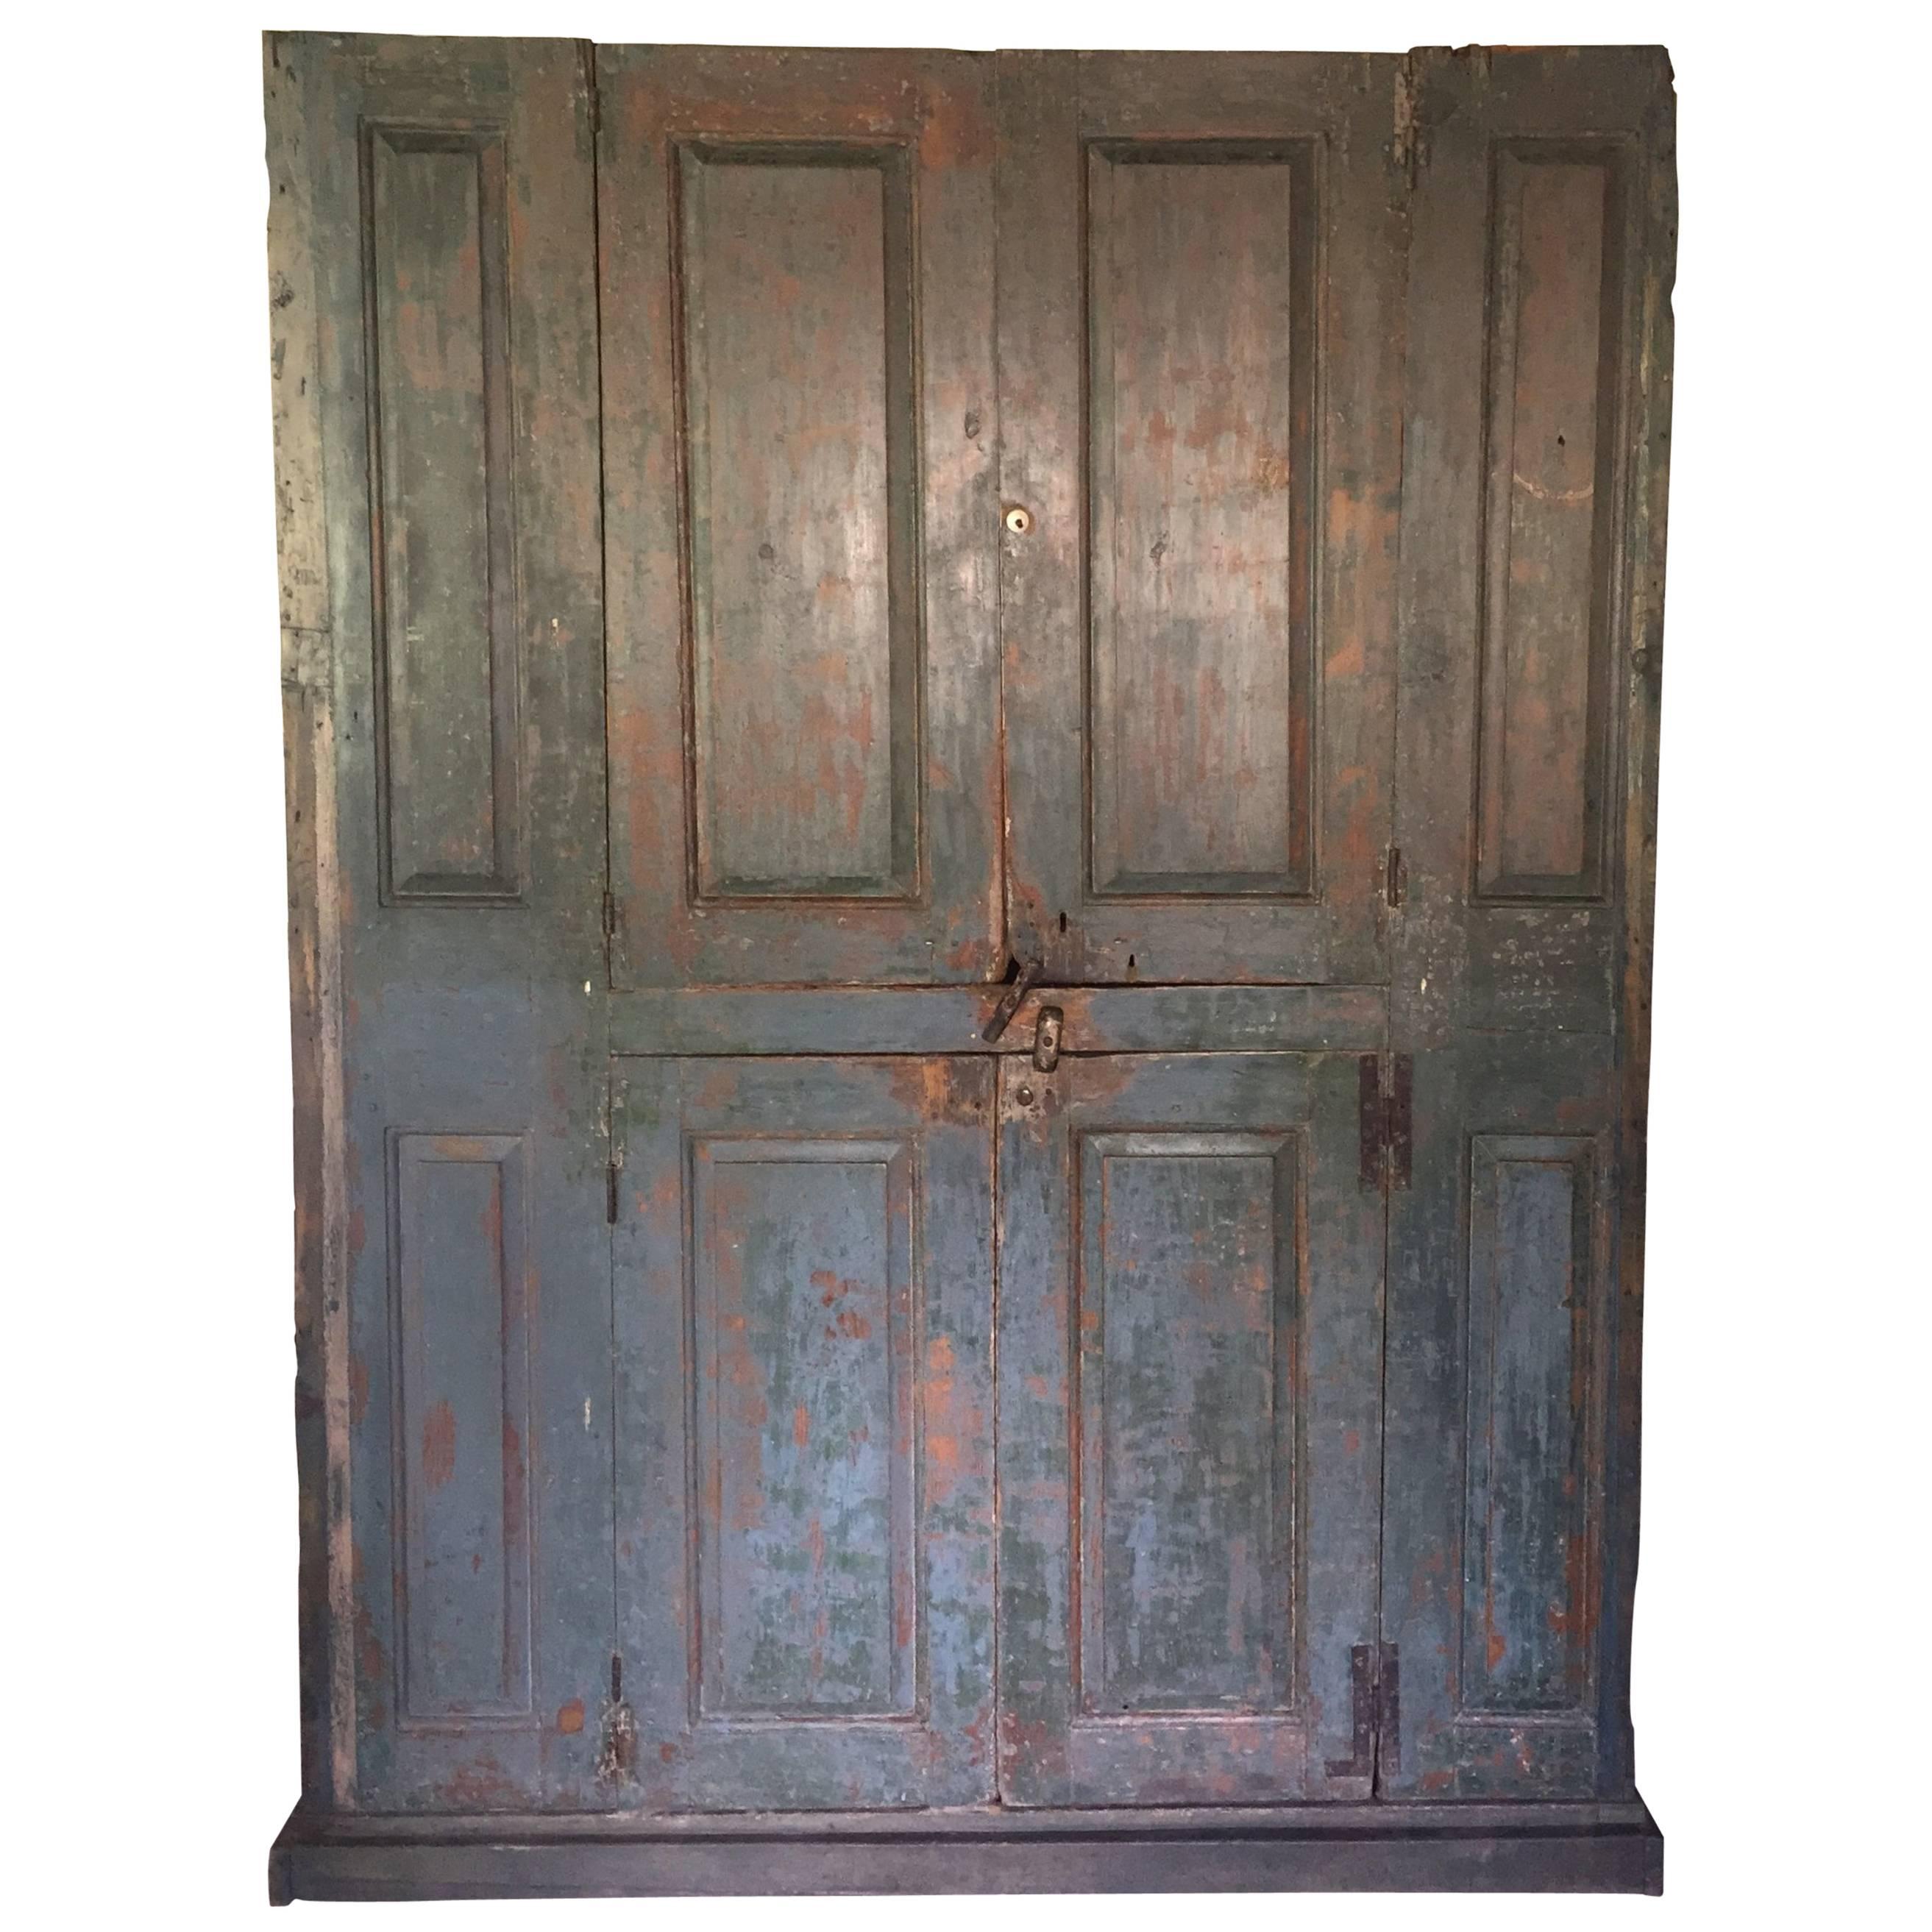 18th Century Blind Door Large Hudson Valley Cupboard with Original Blue Paint